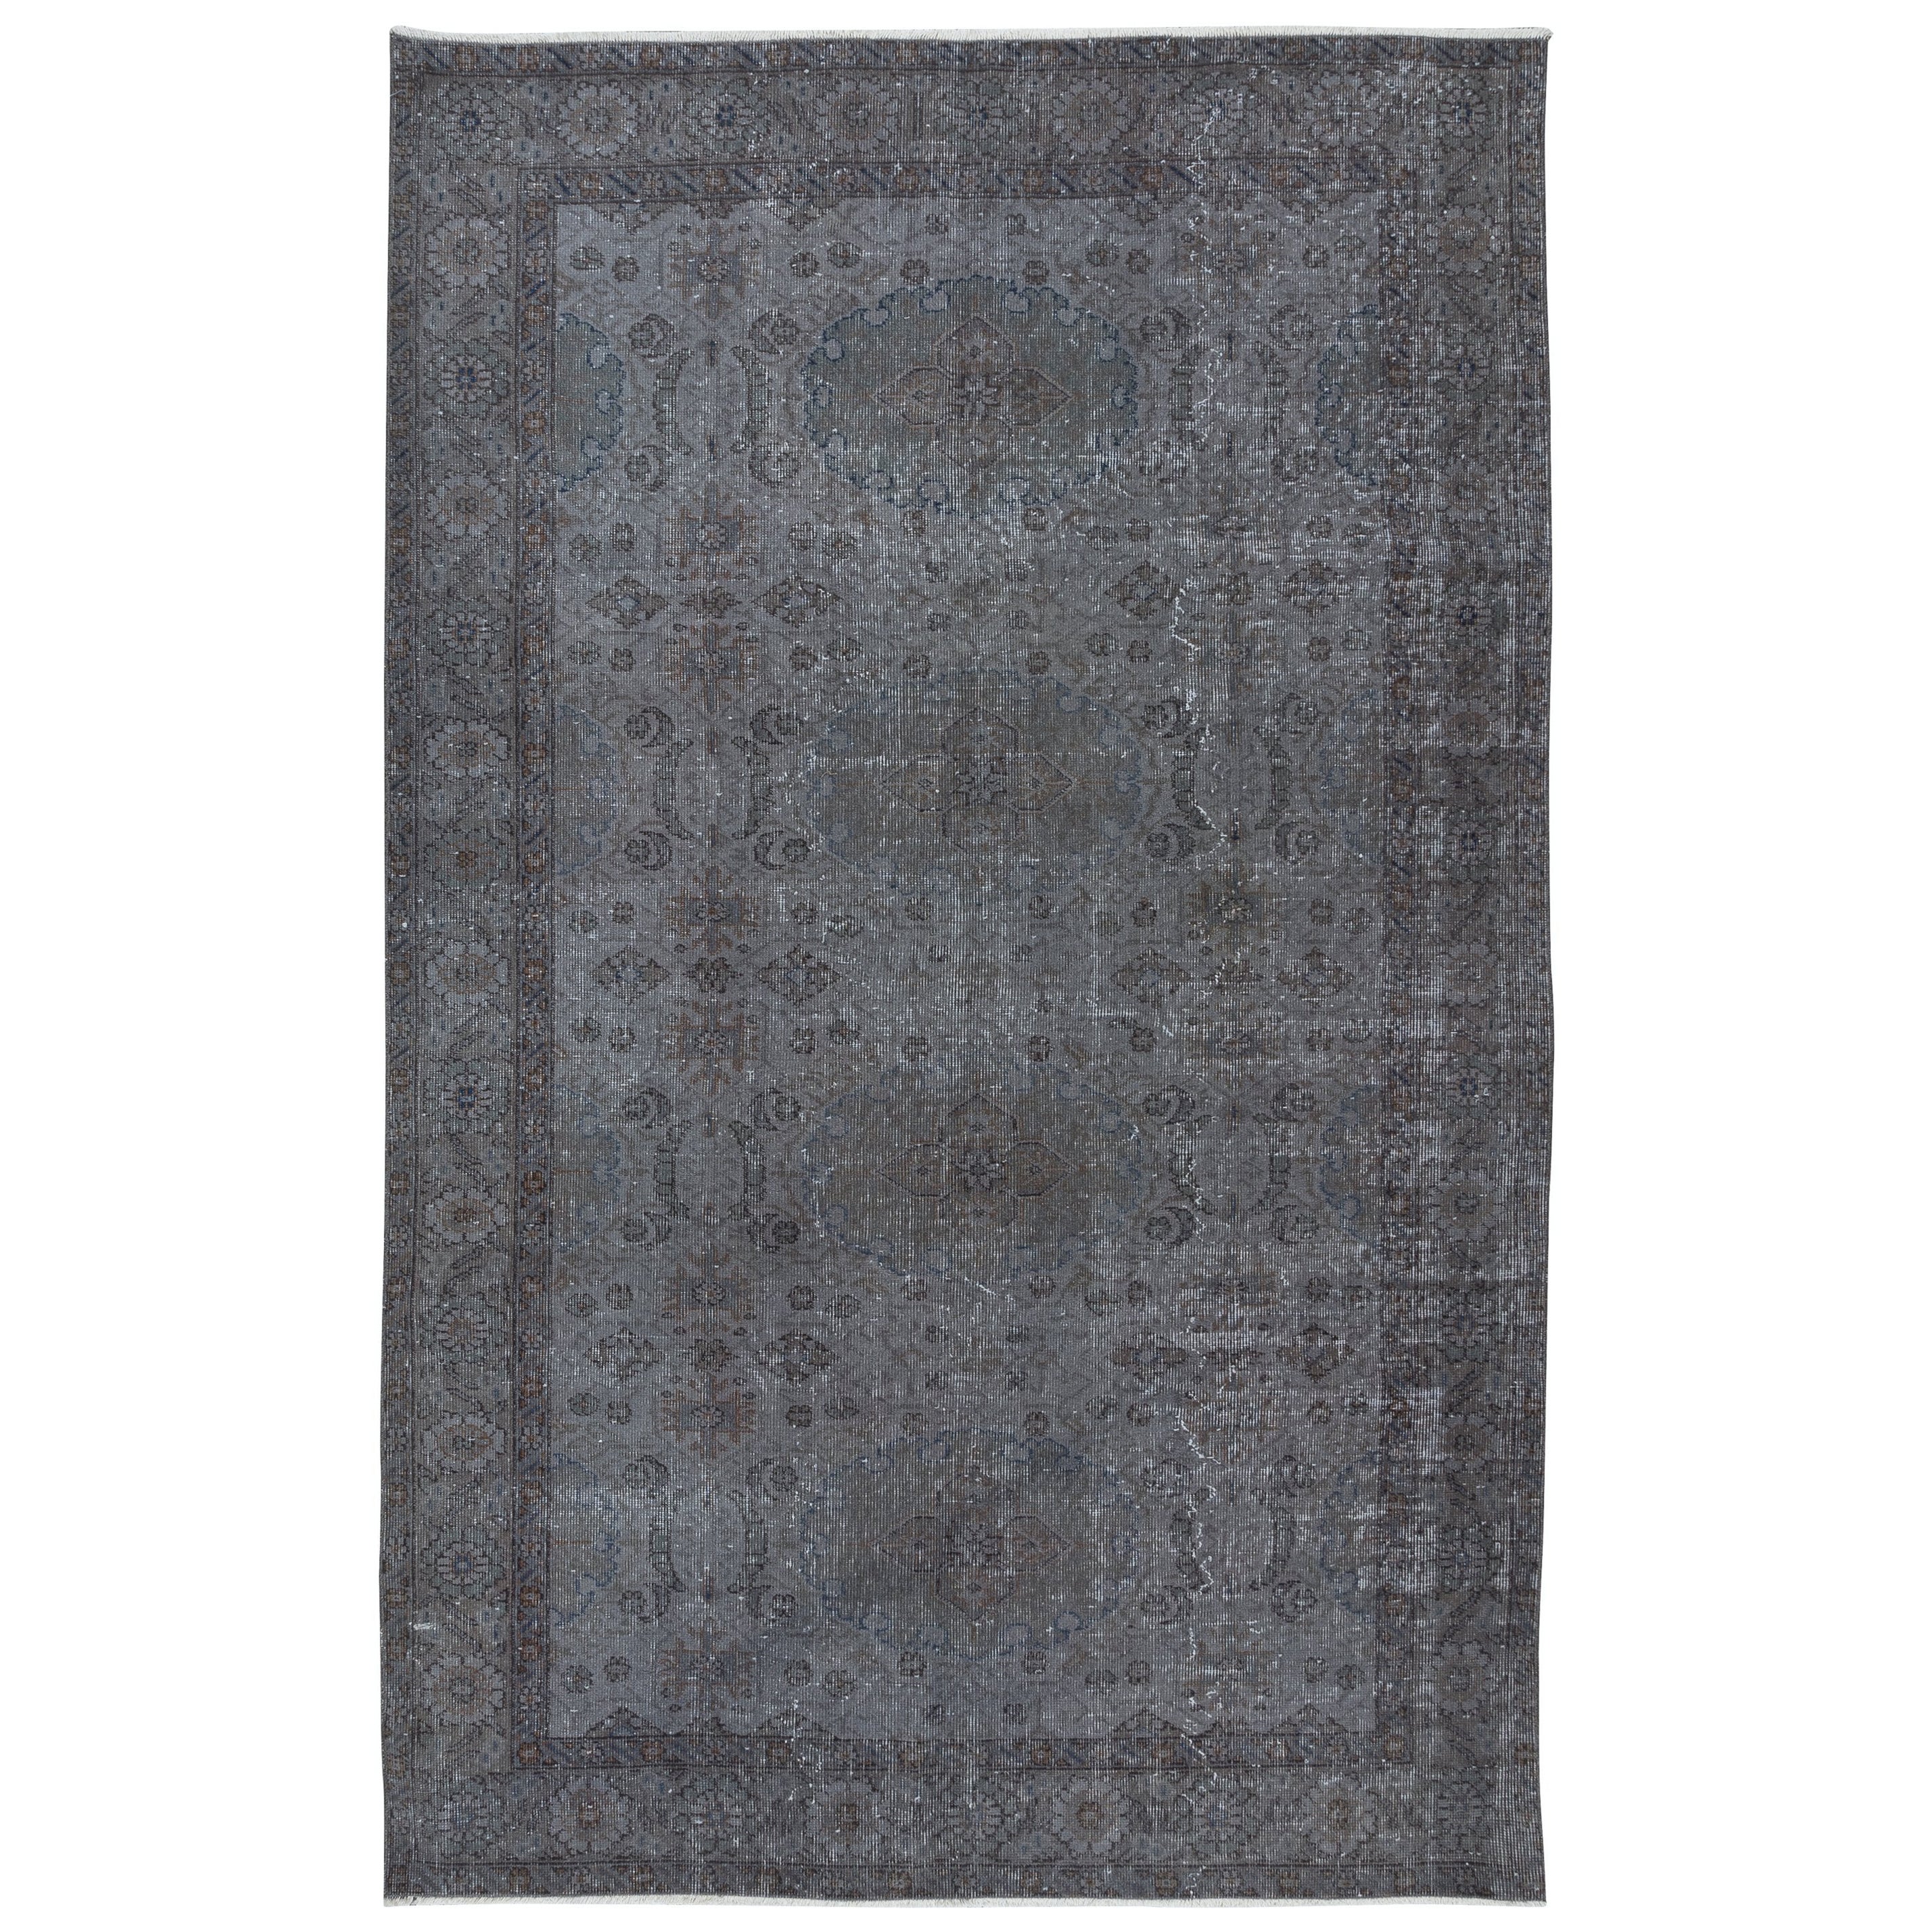 5.6x8.7 Ft Traditional Handmade Rug in Iron Gray Color, Modern Home Decor Carpet